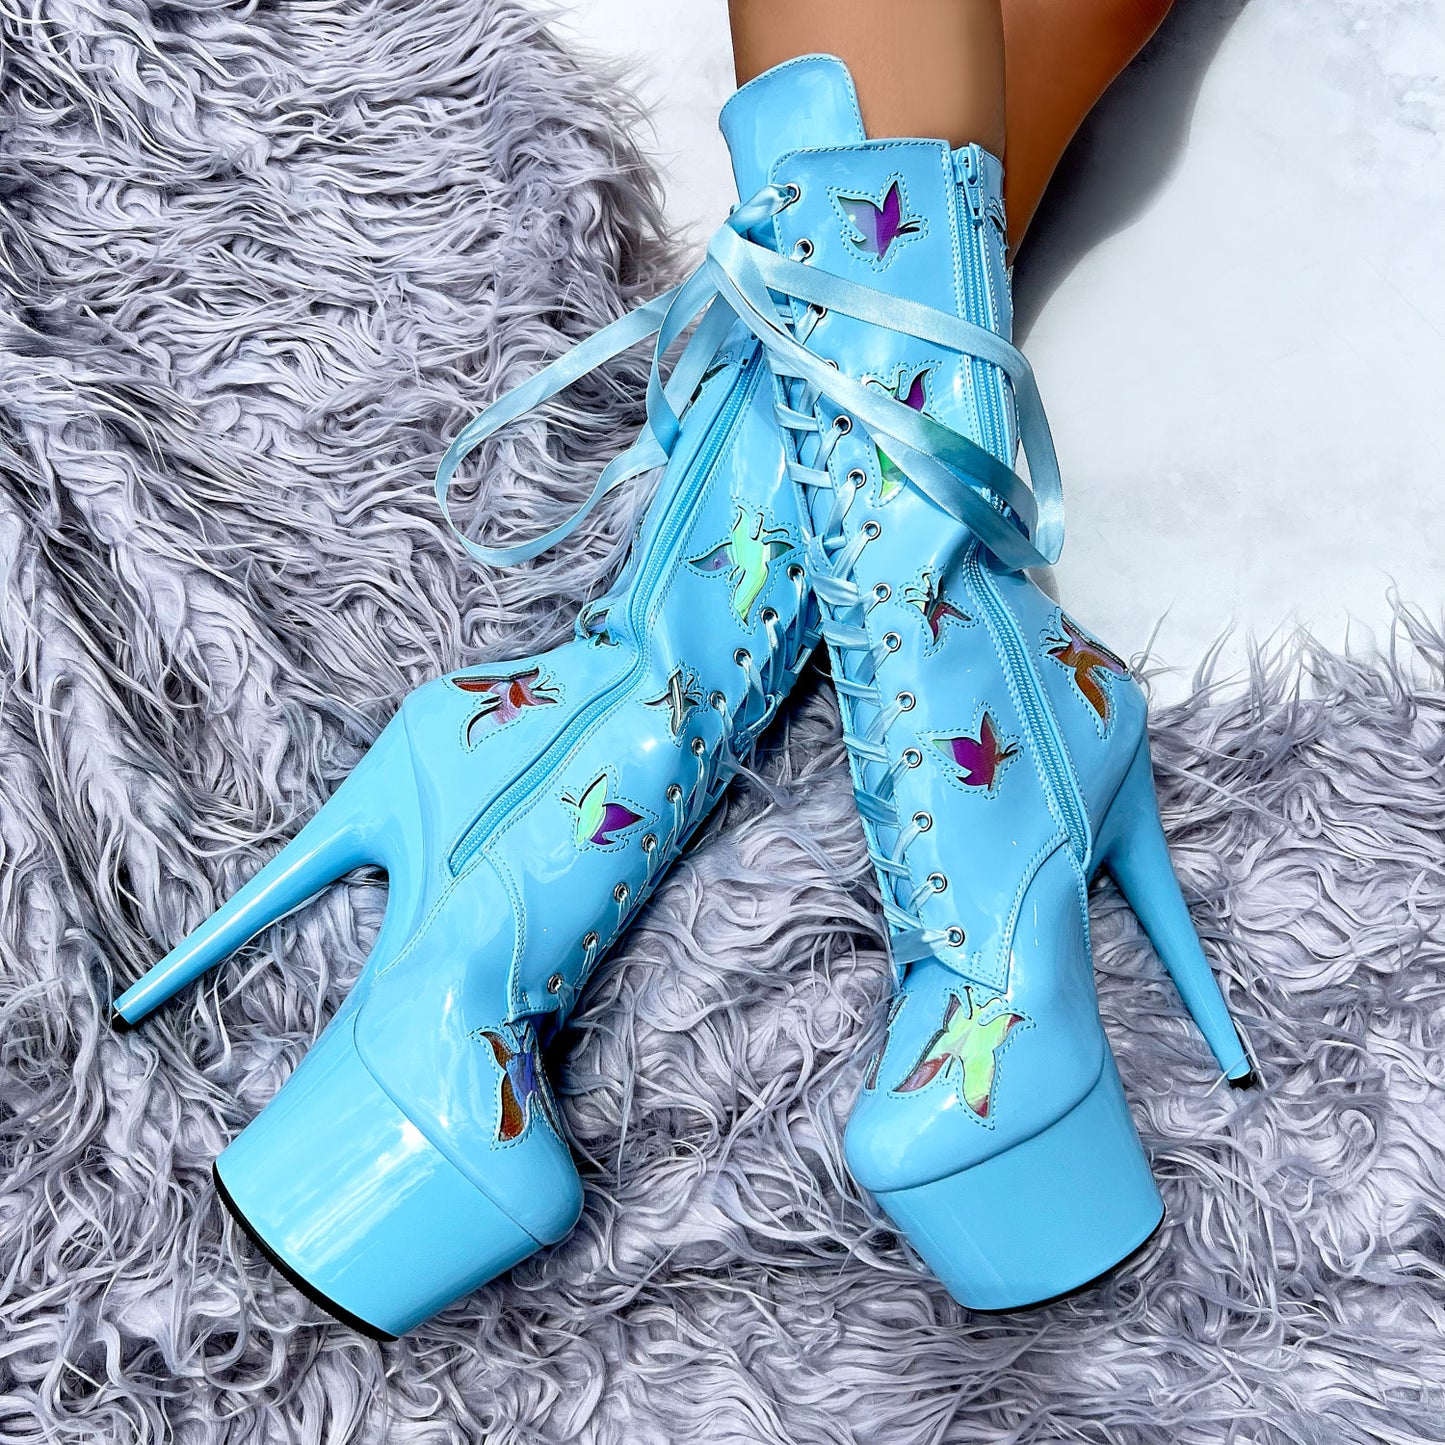 Top view of Butterfly Boot - Blue - 7 INCH